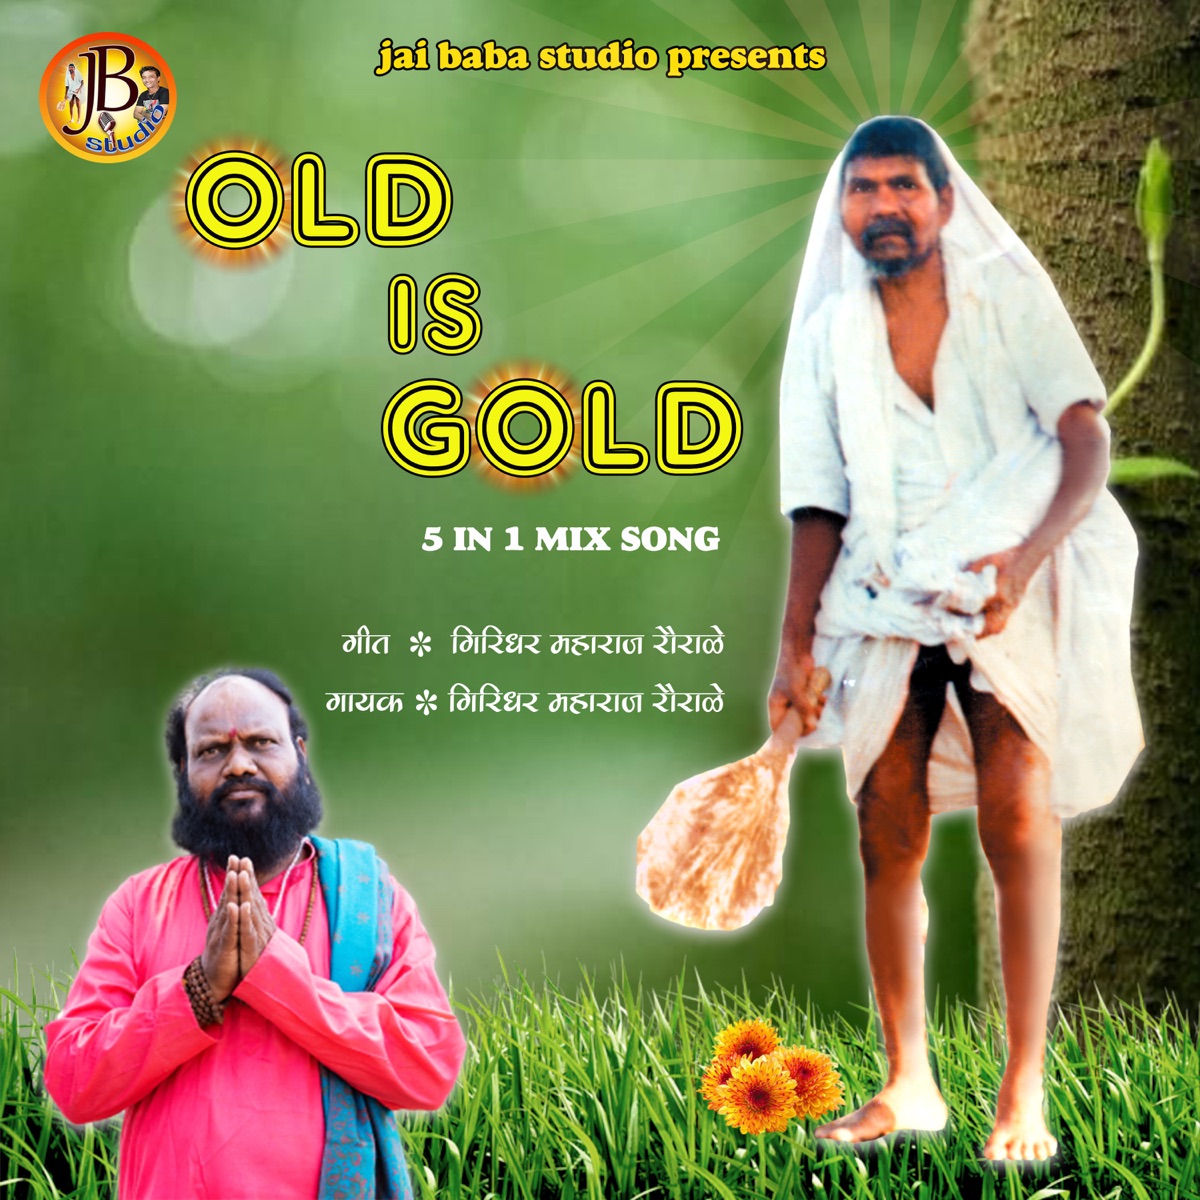 Old Is Gold (5 in 1 Mix Song) - Album by giridhar maharaj - Apple Music